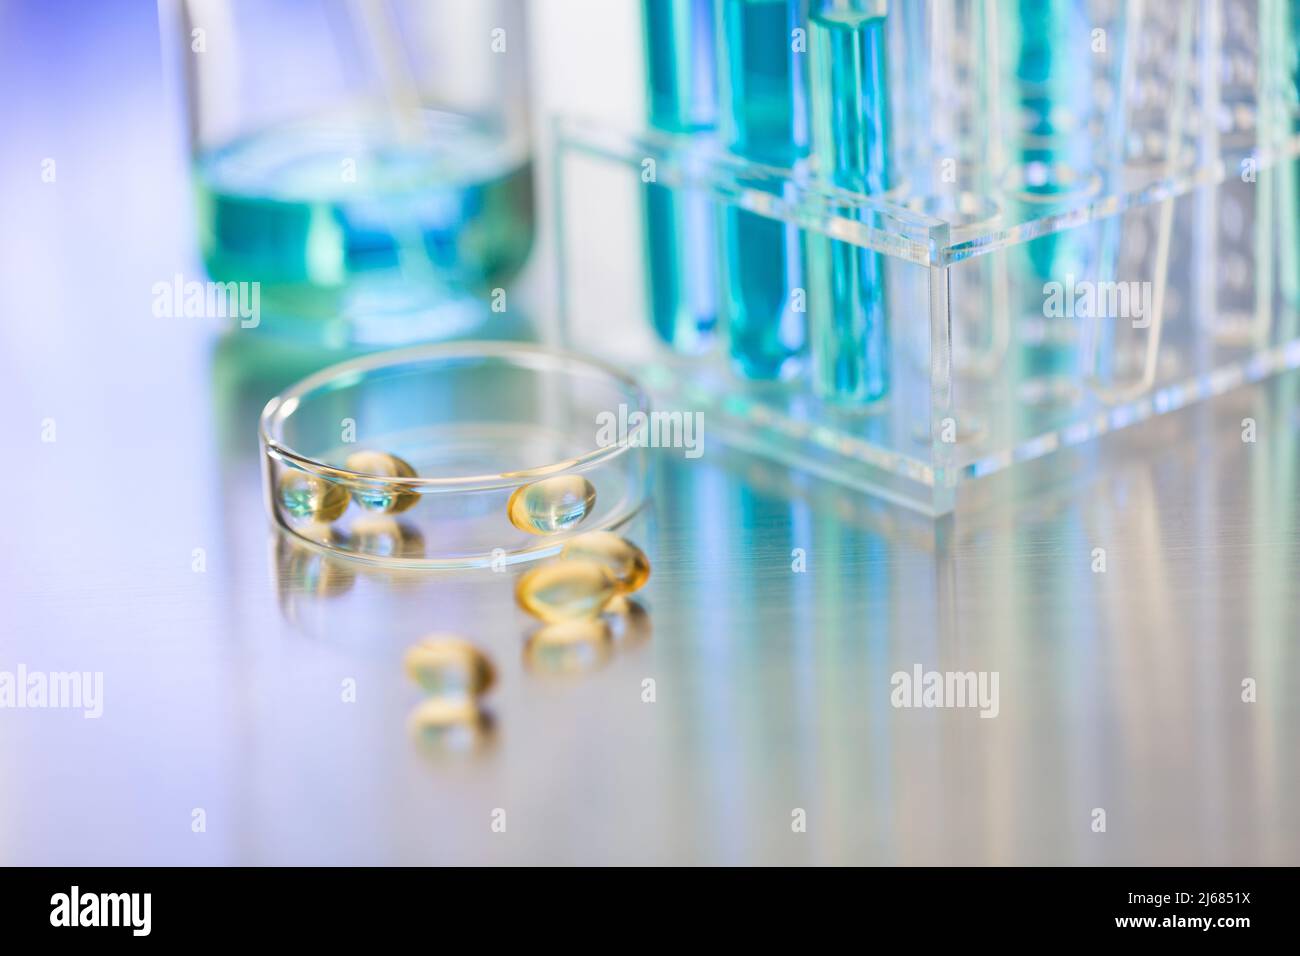 Glass dish containing soft capsules in a chemistry LABS with beaker and test tube rack - stock photo Stock Photo